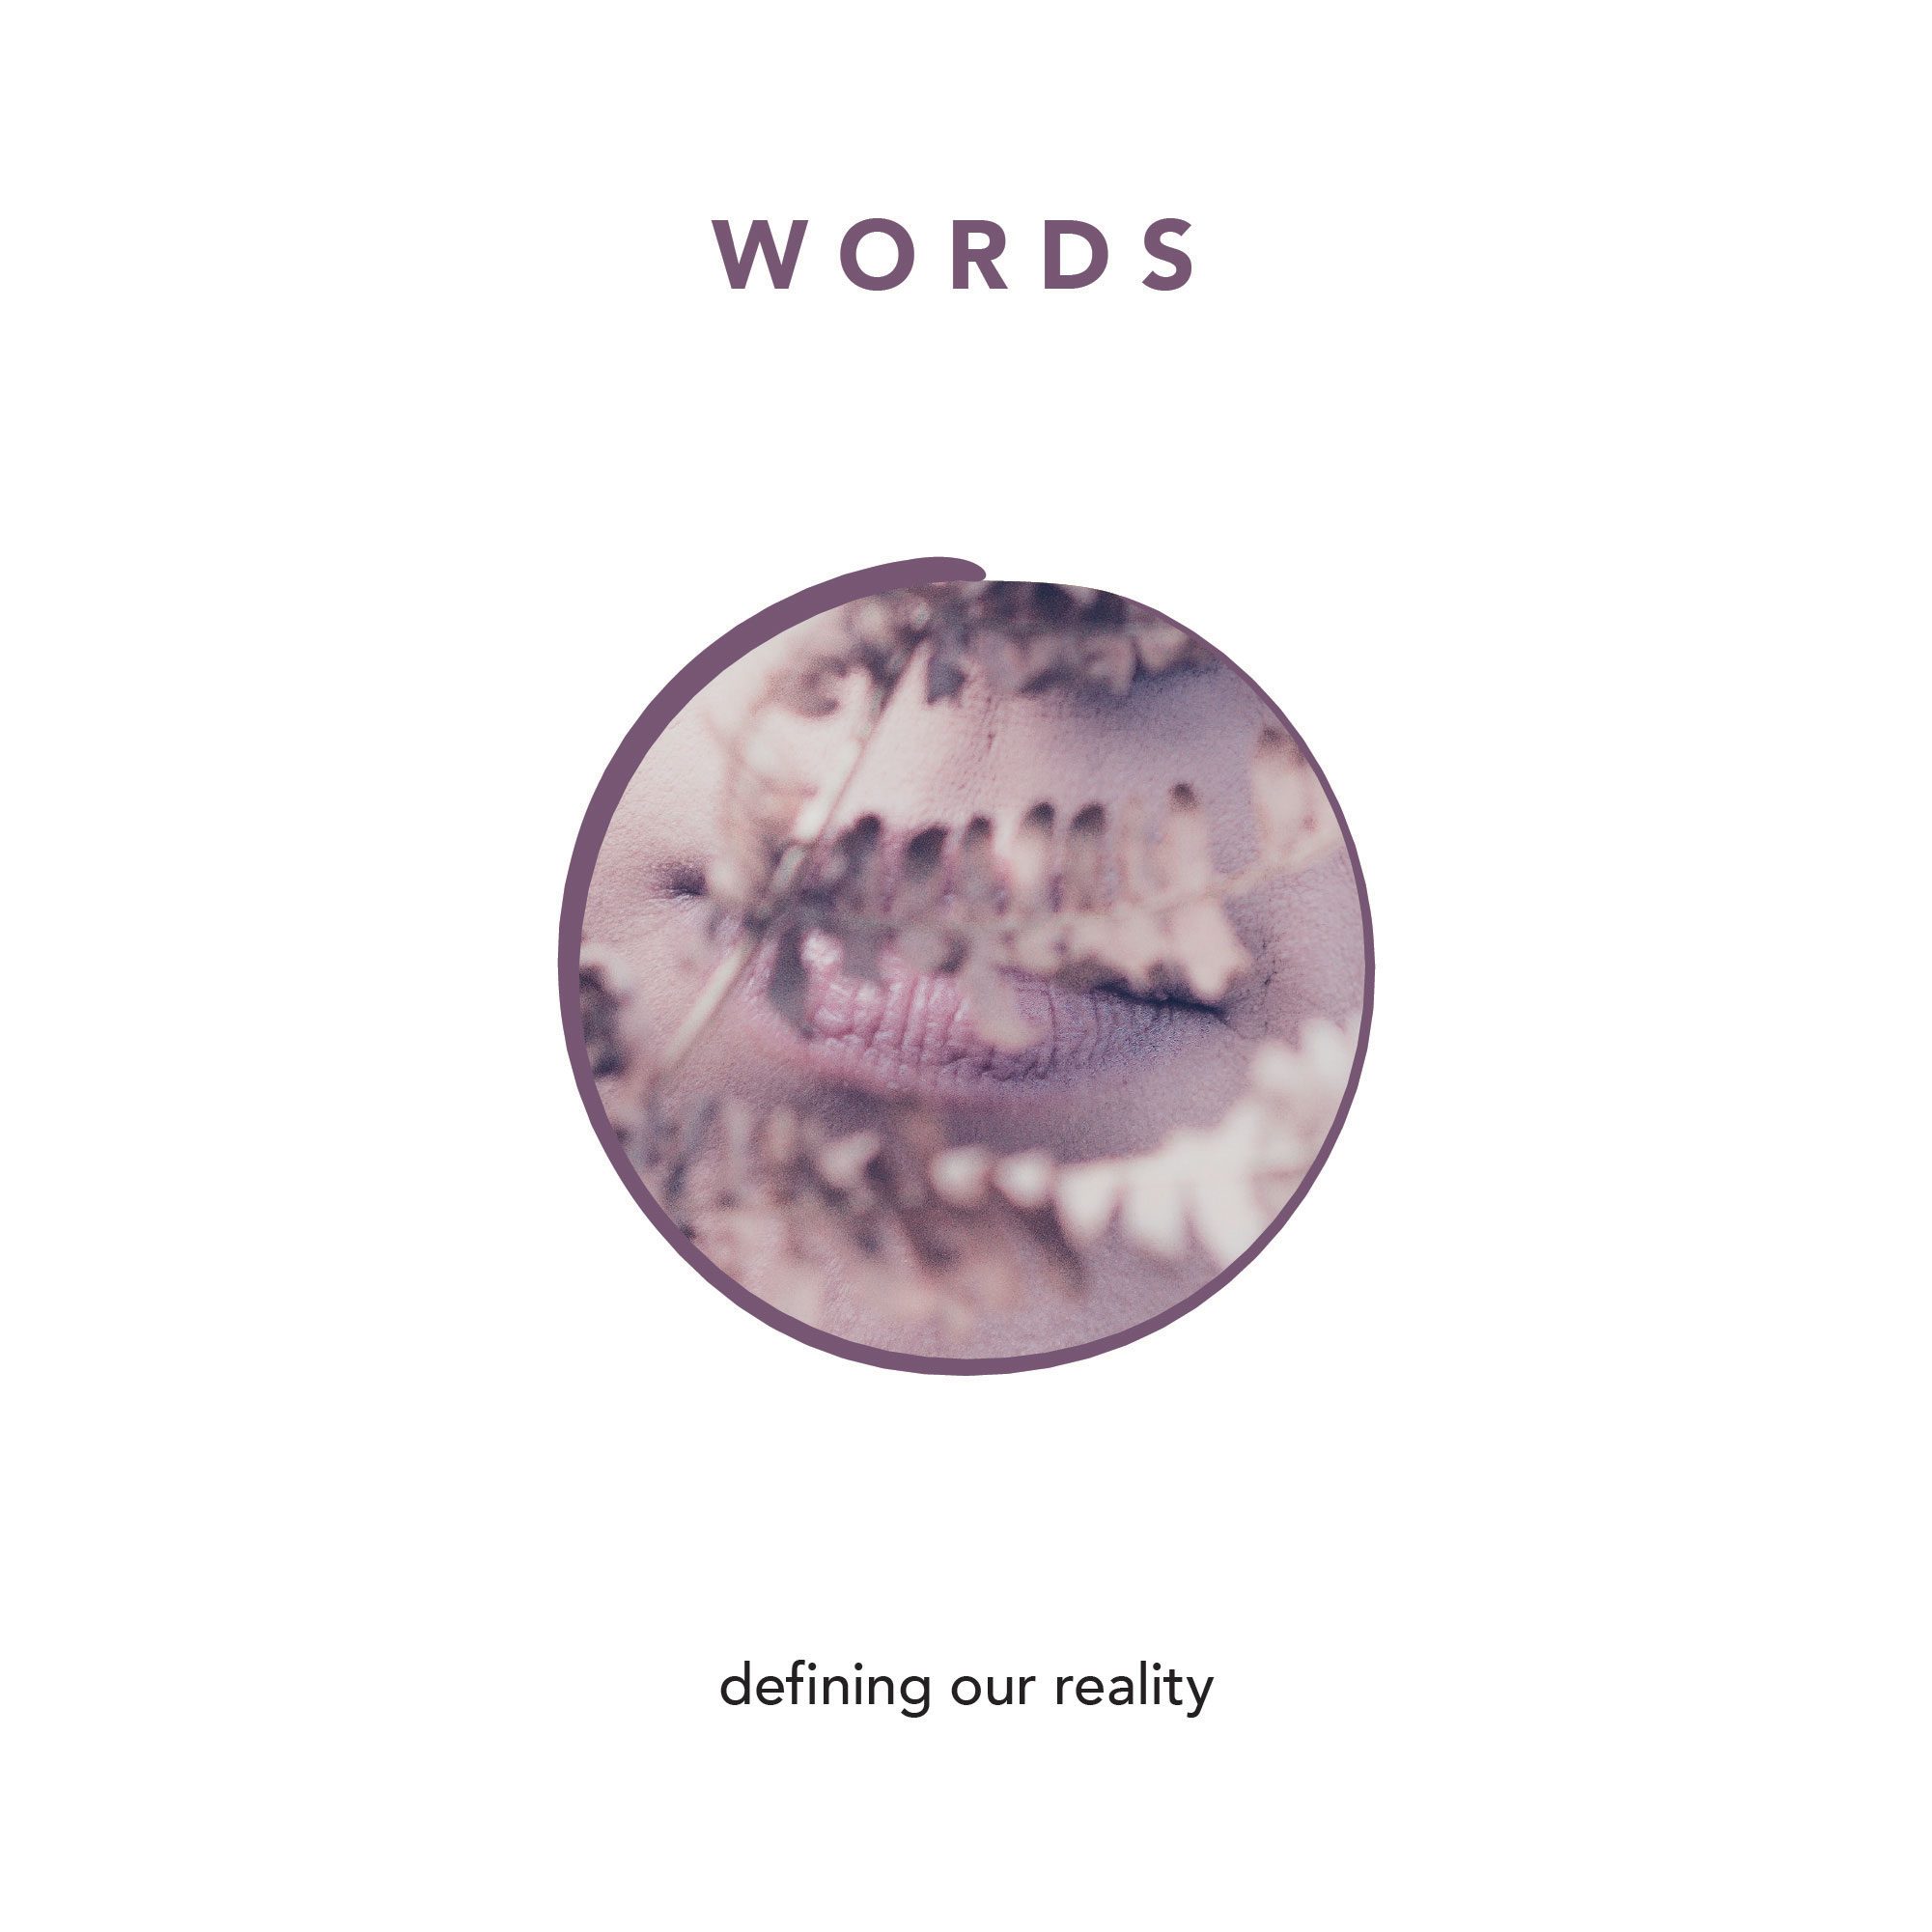 WORDS - consciously creating our reality with the power of language